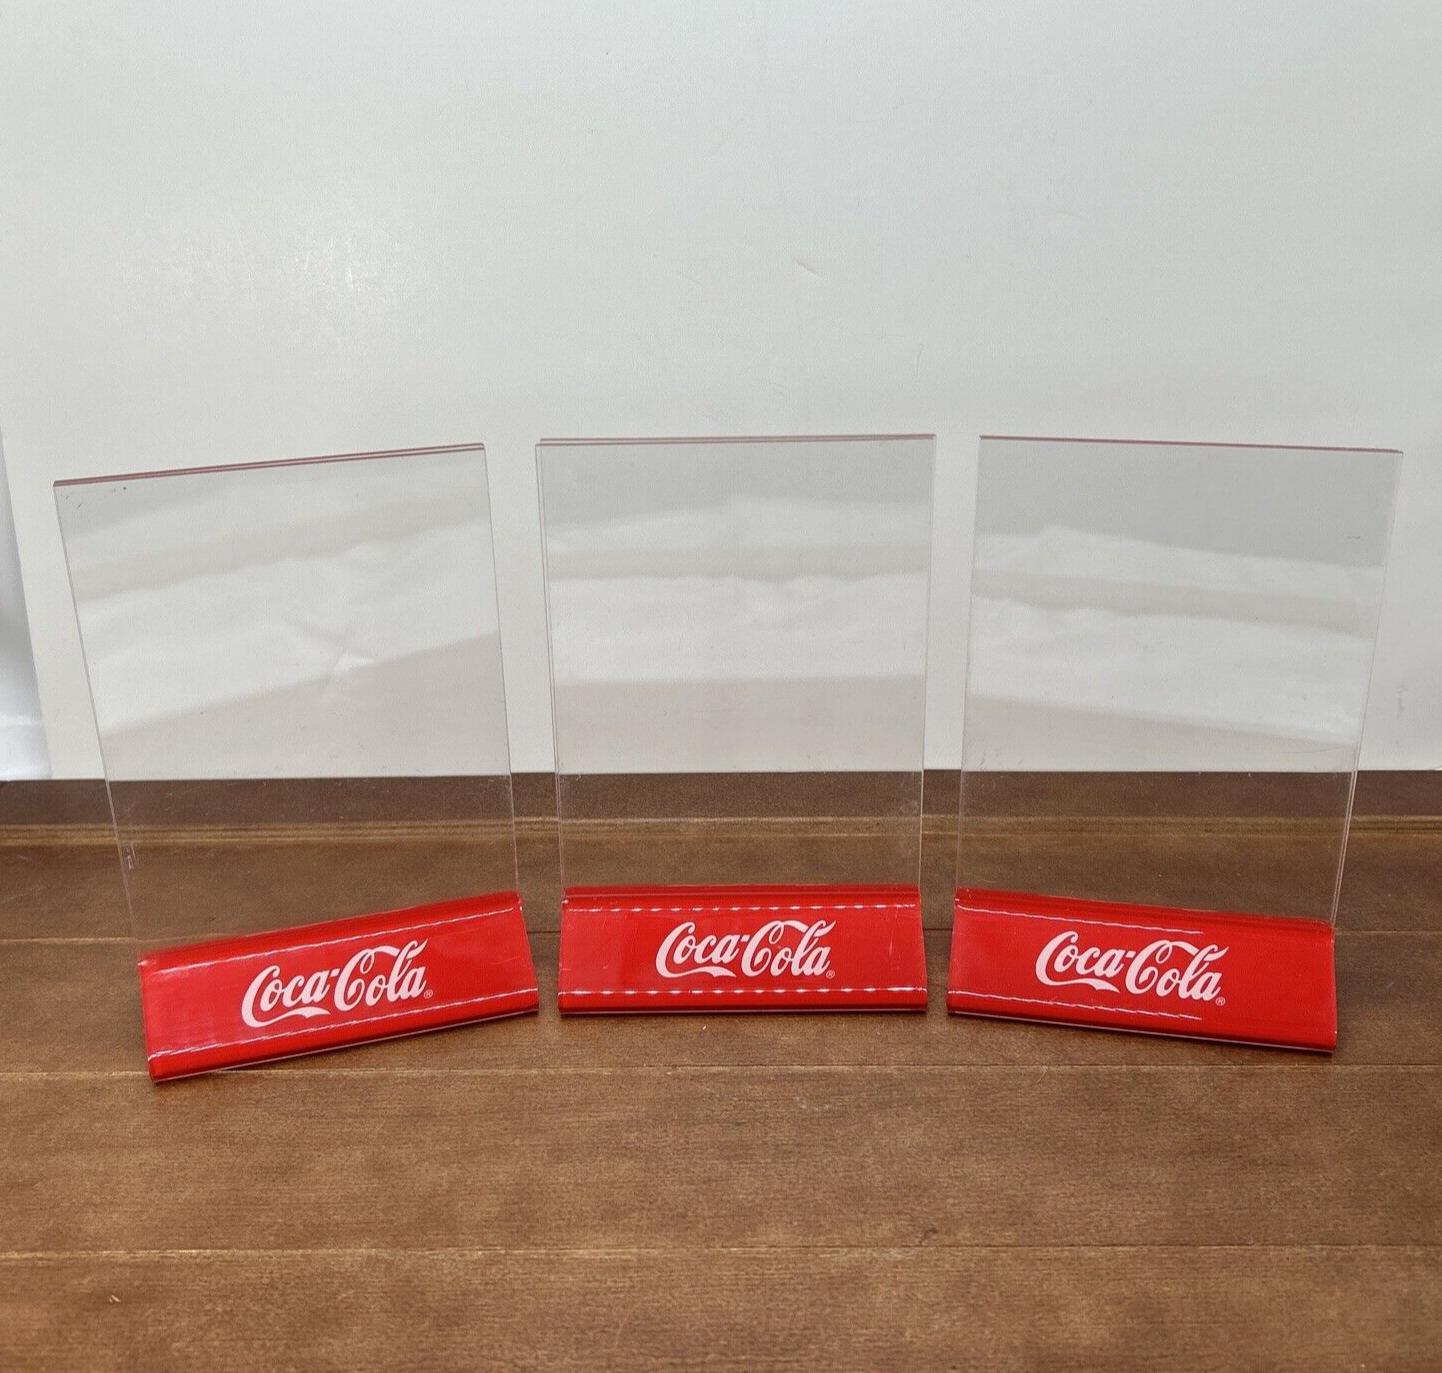 Set of 3 Coca-Cola Acrylic Restaurant Bar Menu Ads Picture Holder Collectible